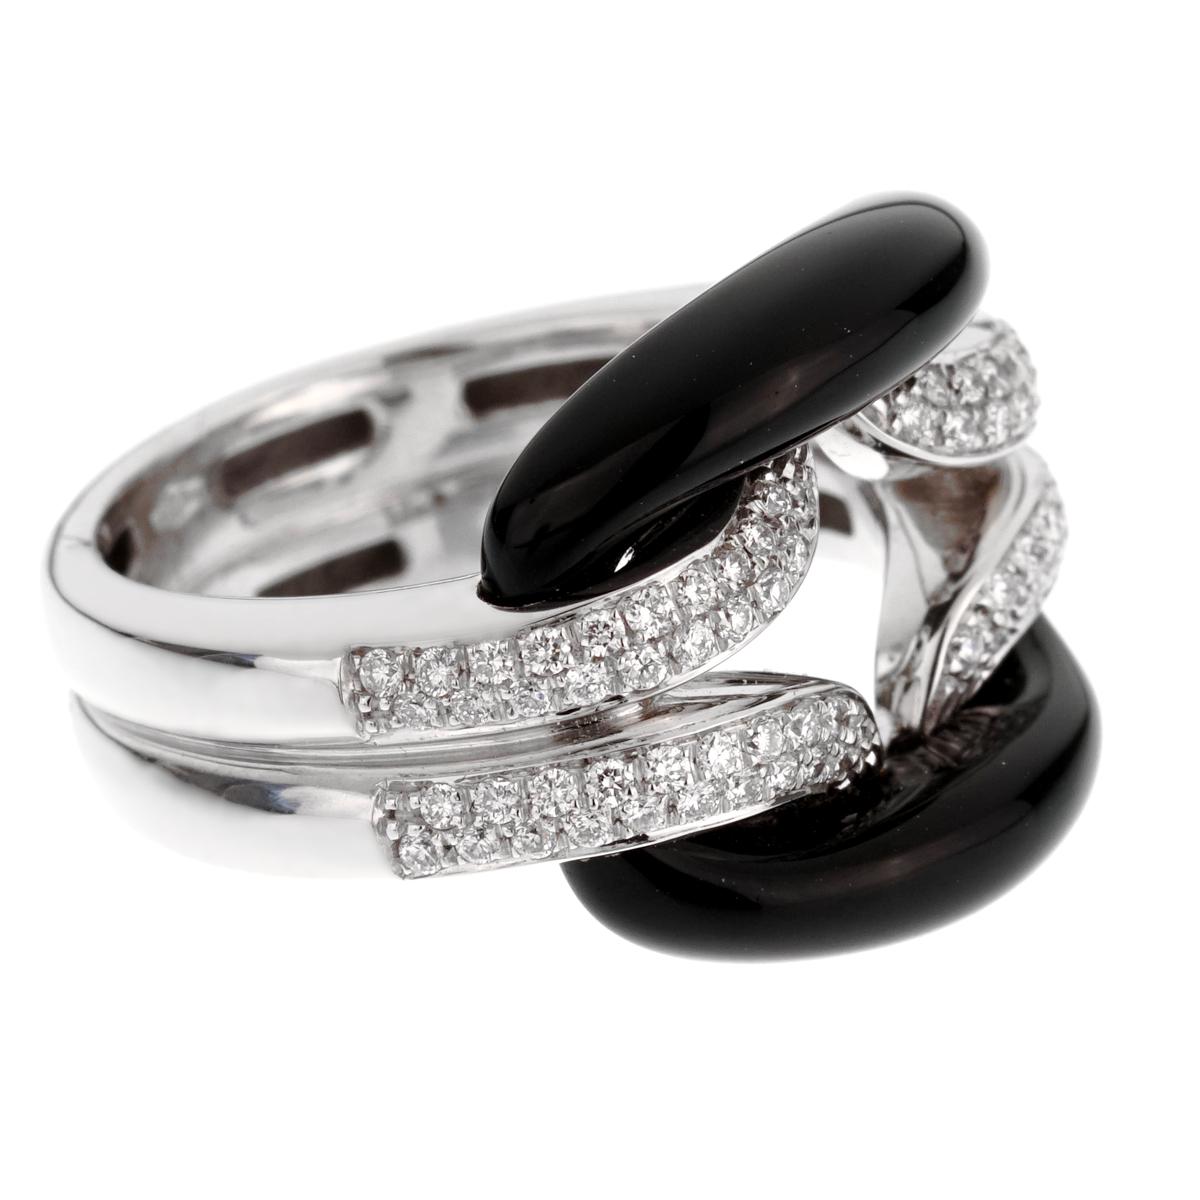 A chic Damiani diamond ring from the lace collection crafted in 18k white gold. The ring measures a size 4 1/2 and can be resized.

Retail Price: $5985 +Tax